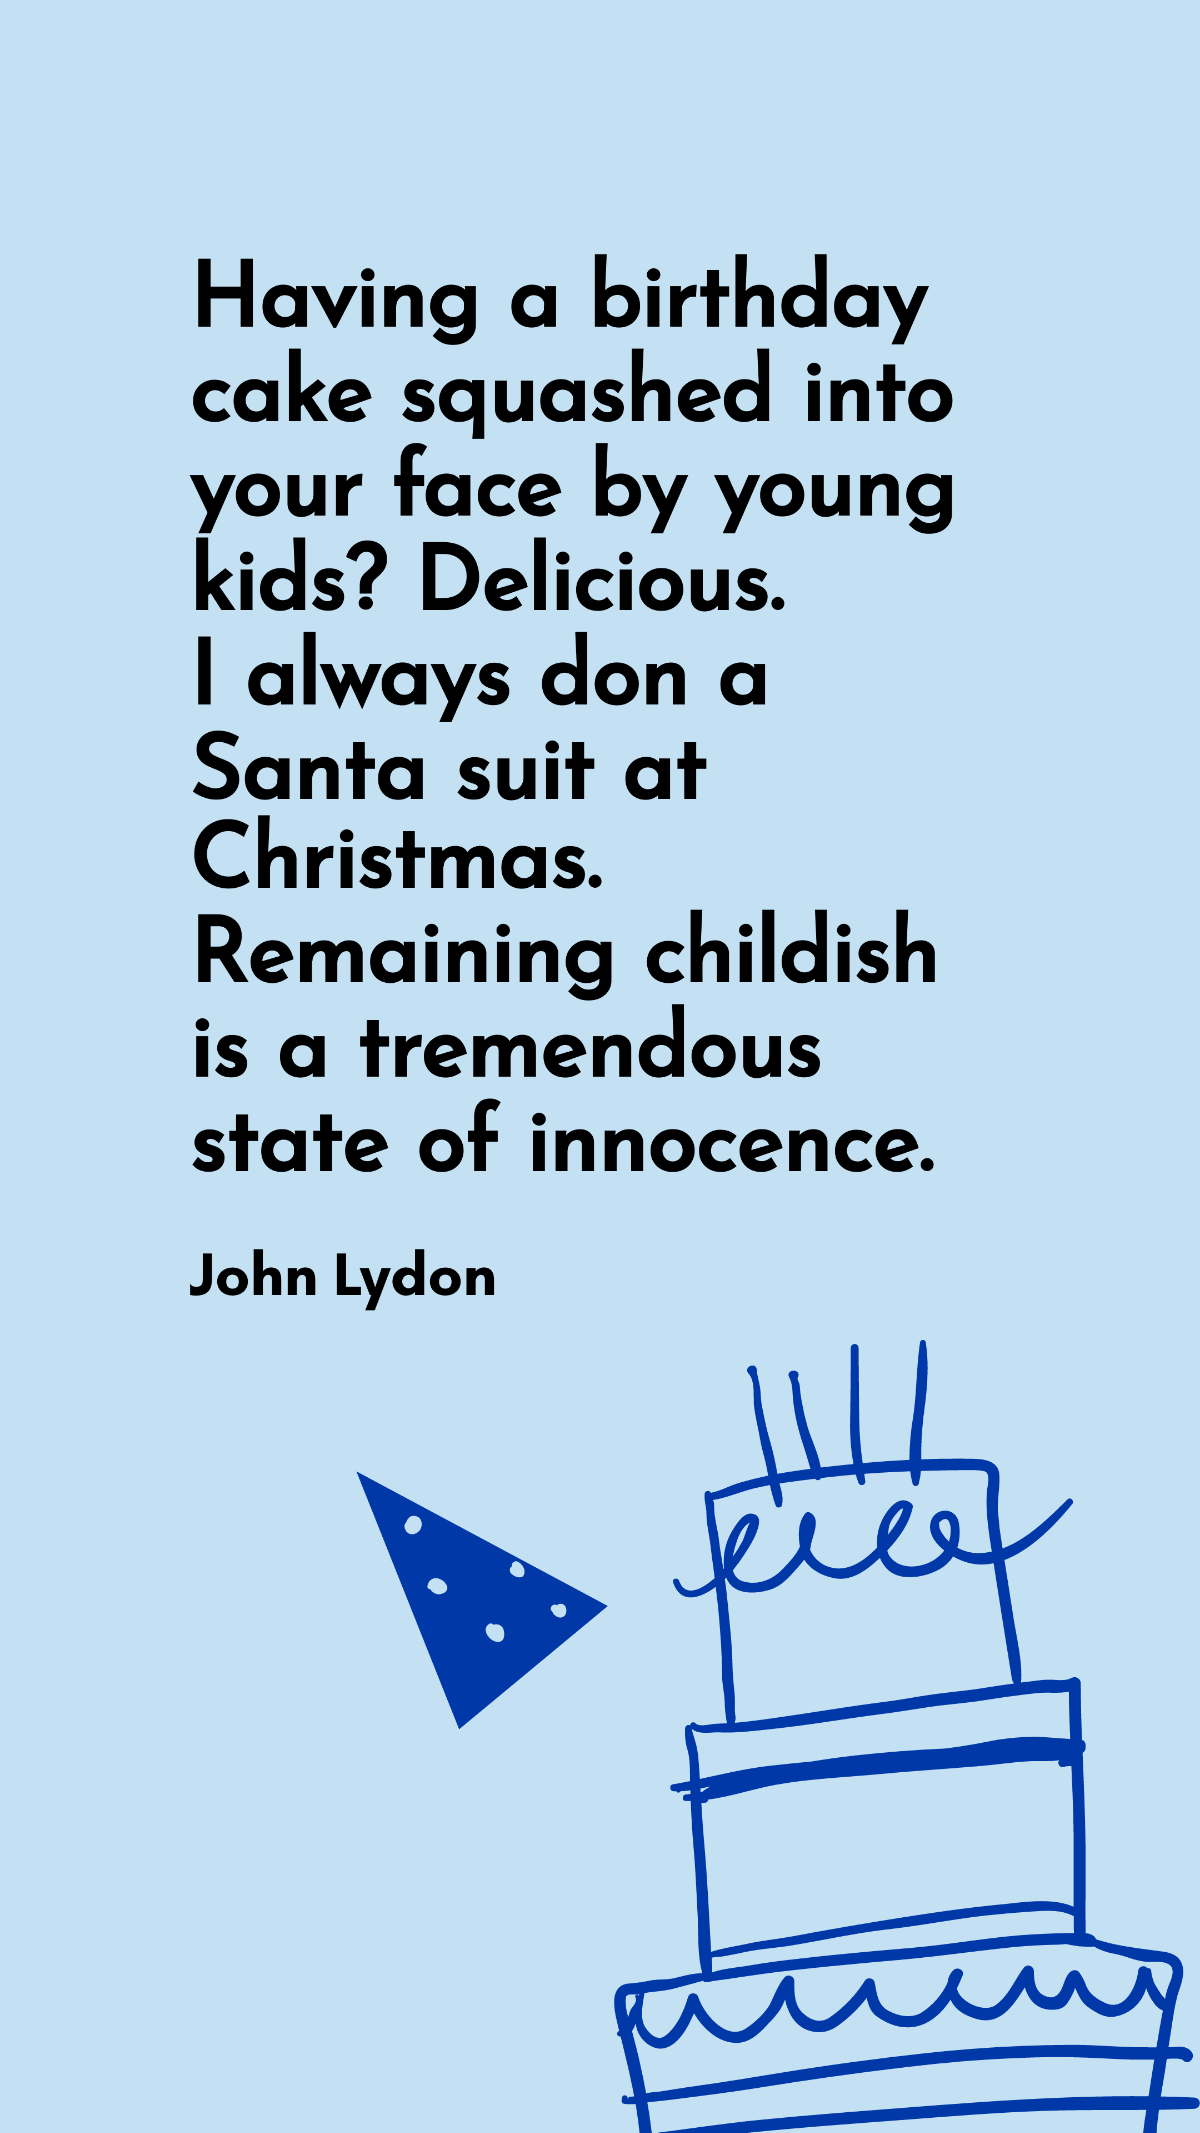 John Lydon - Having a birthday cake squashed into your face by young kids? Delicious. I always don a Santa suit at Christmas. Remaining childish is a tremendous state of innocence. Template